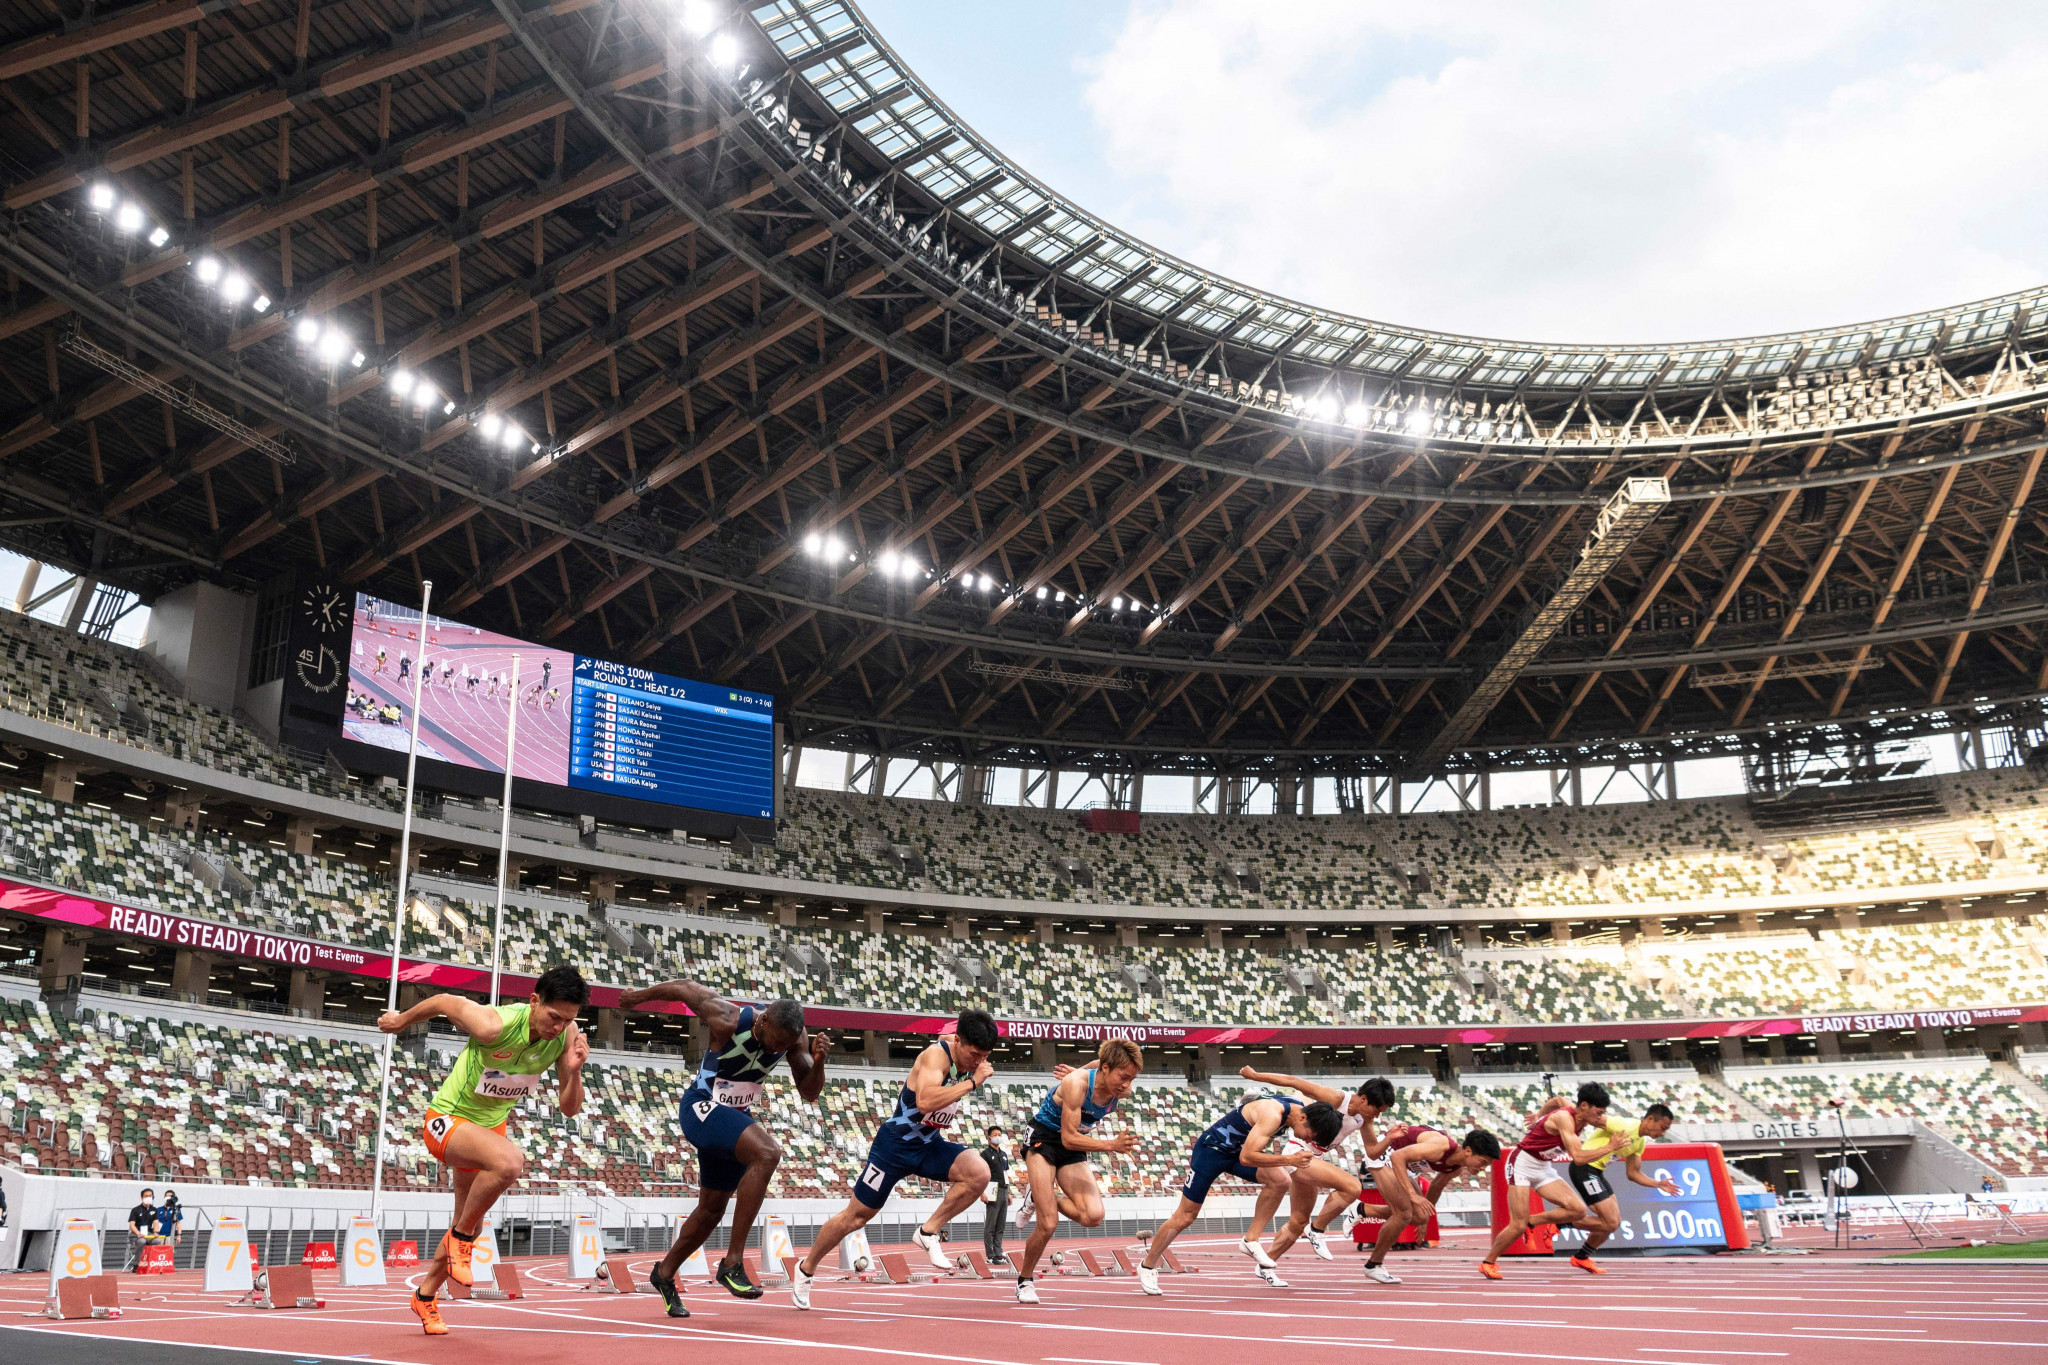 Japan's National Stadium has been revamped ahead of the Tokyo 2020 Olympics ©Getty Images